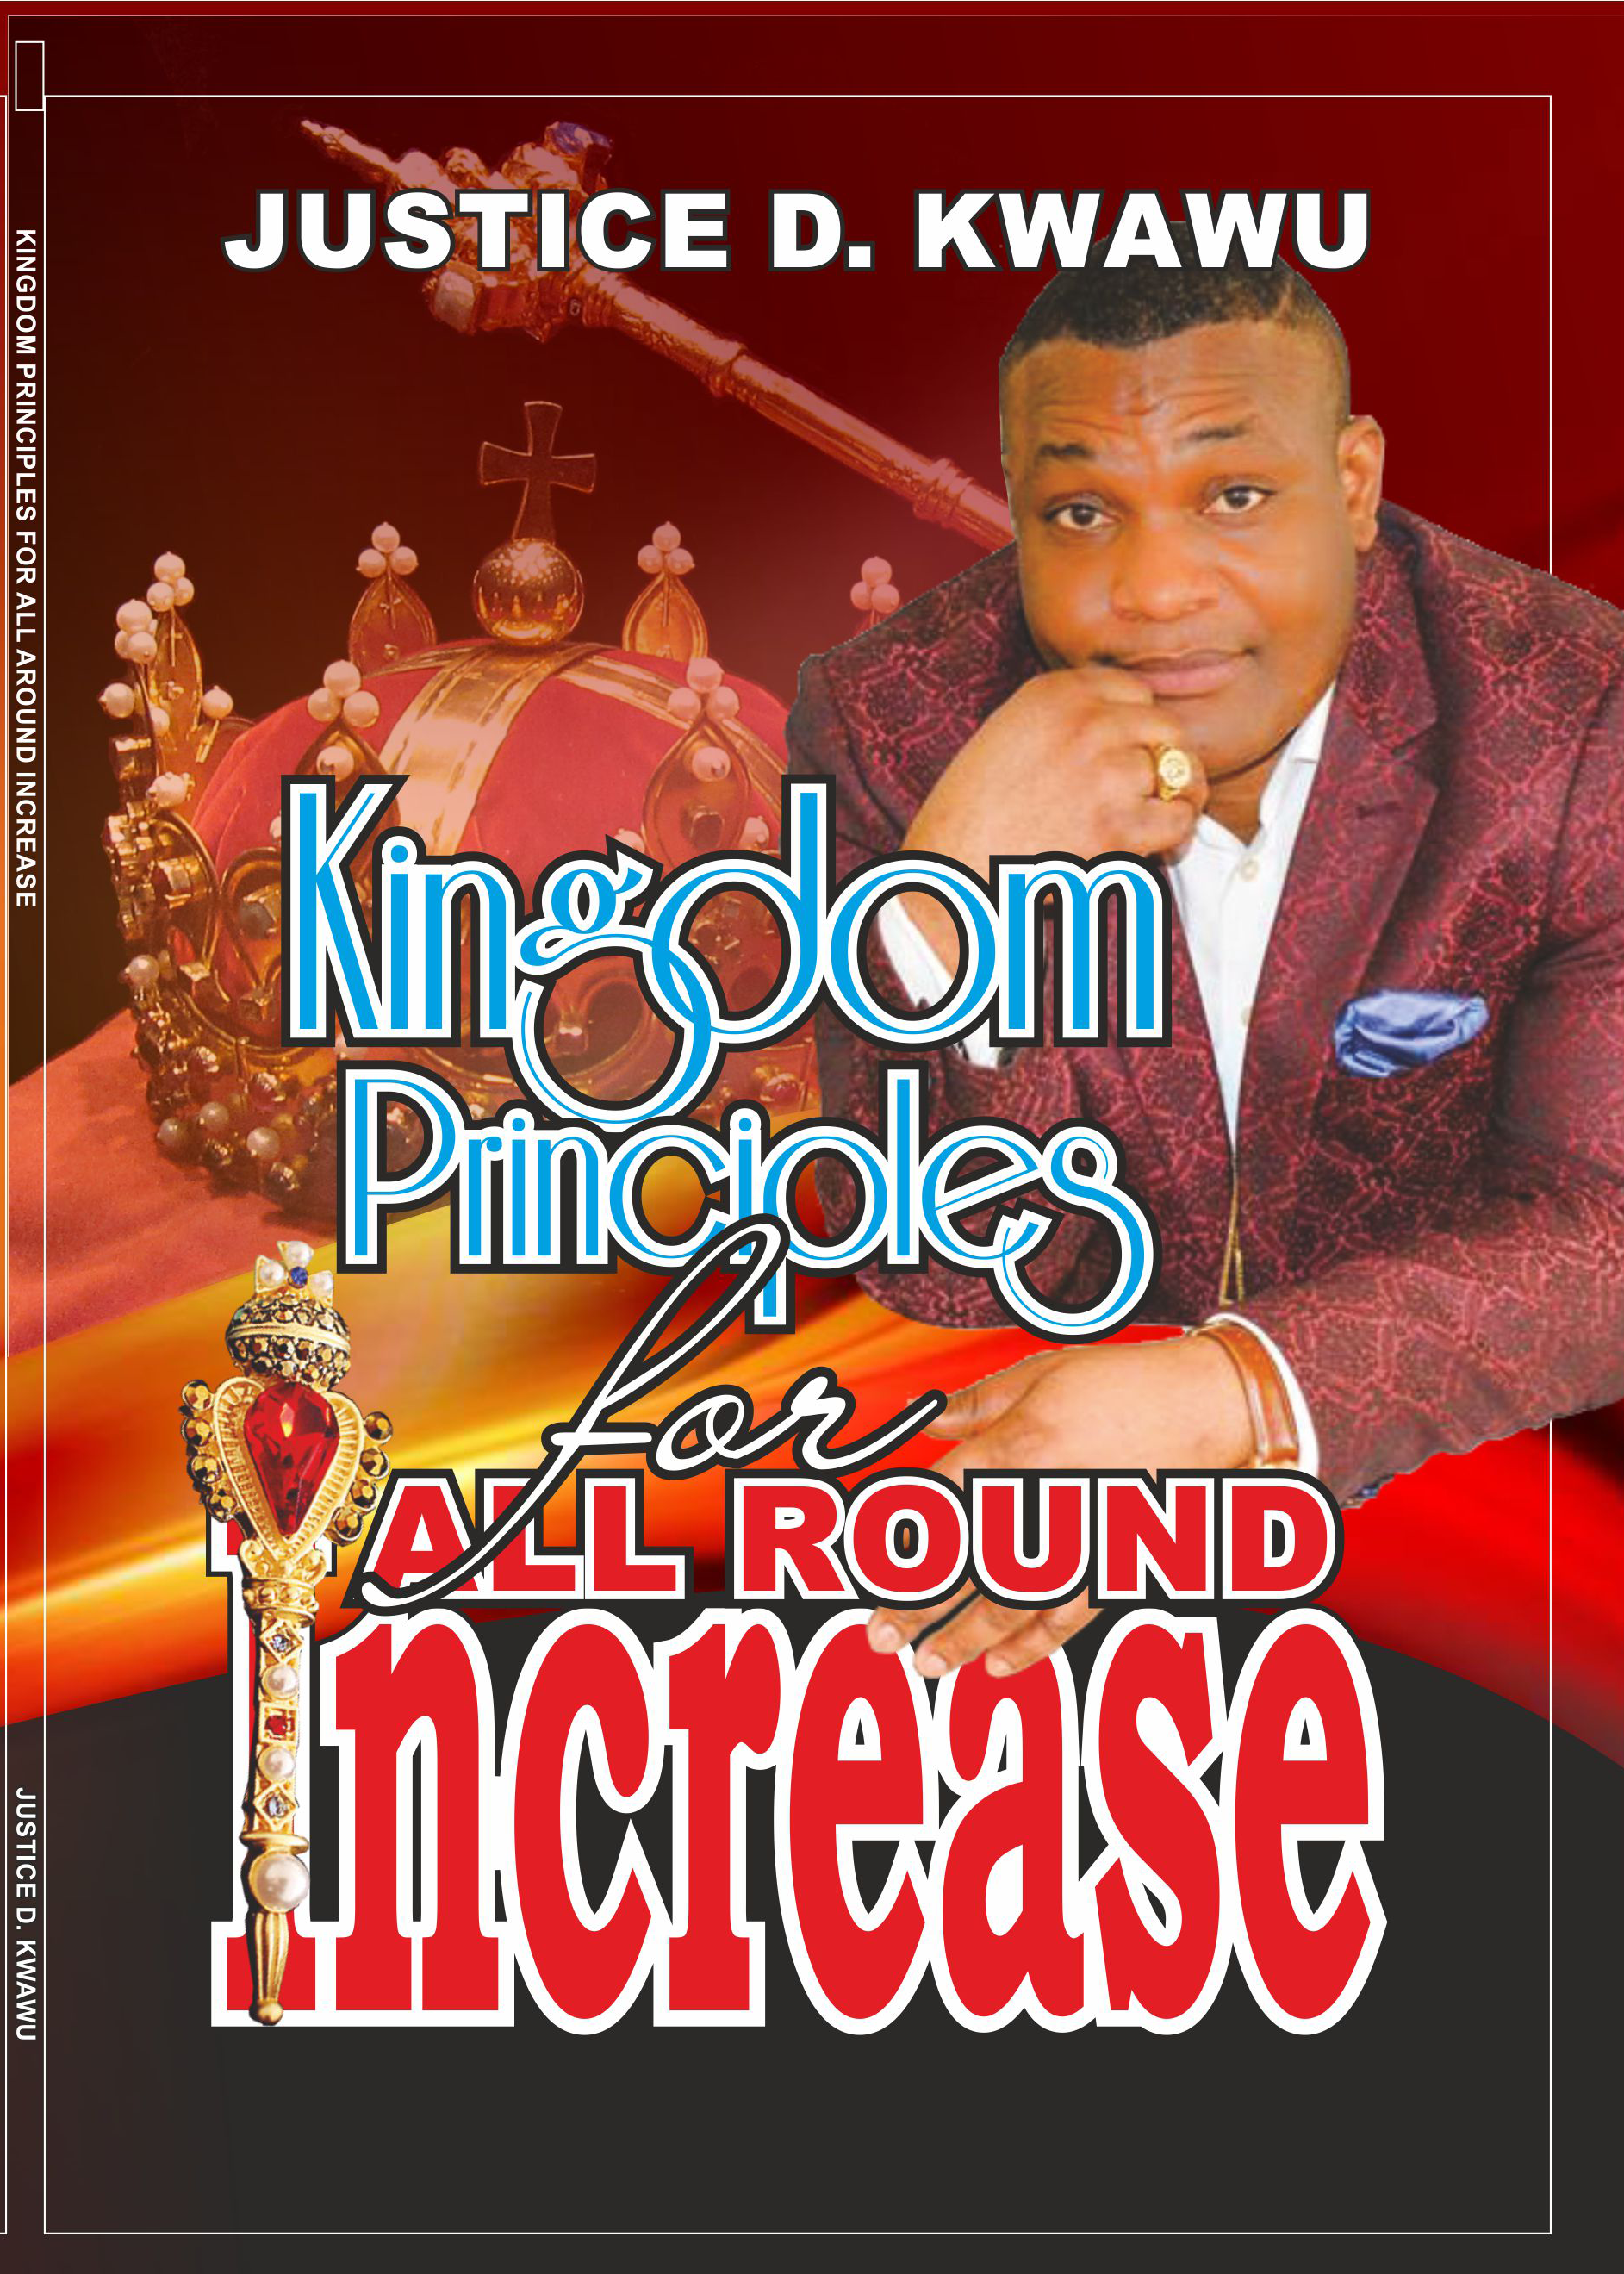 Kingdom Principles for all round increase